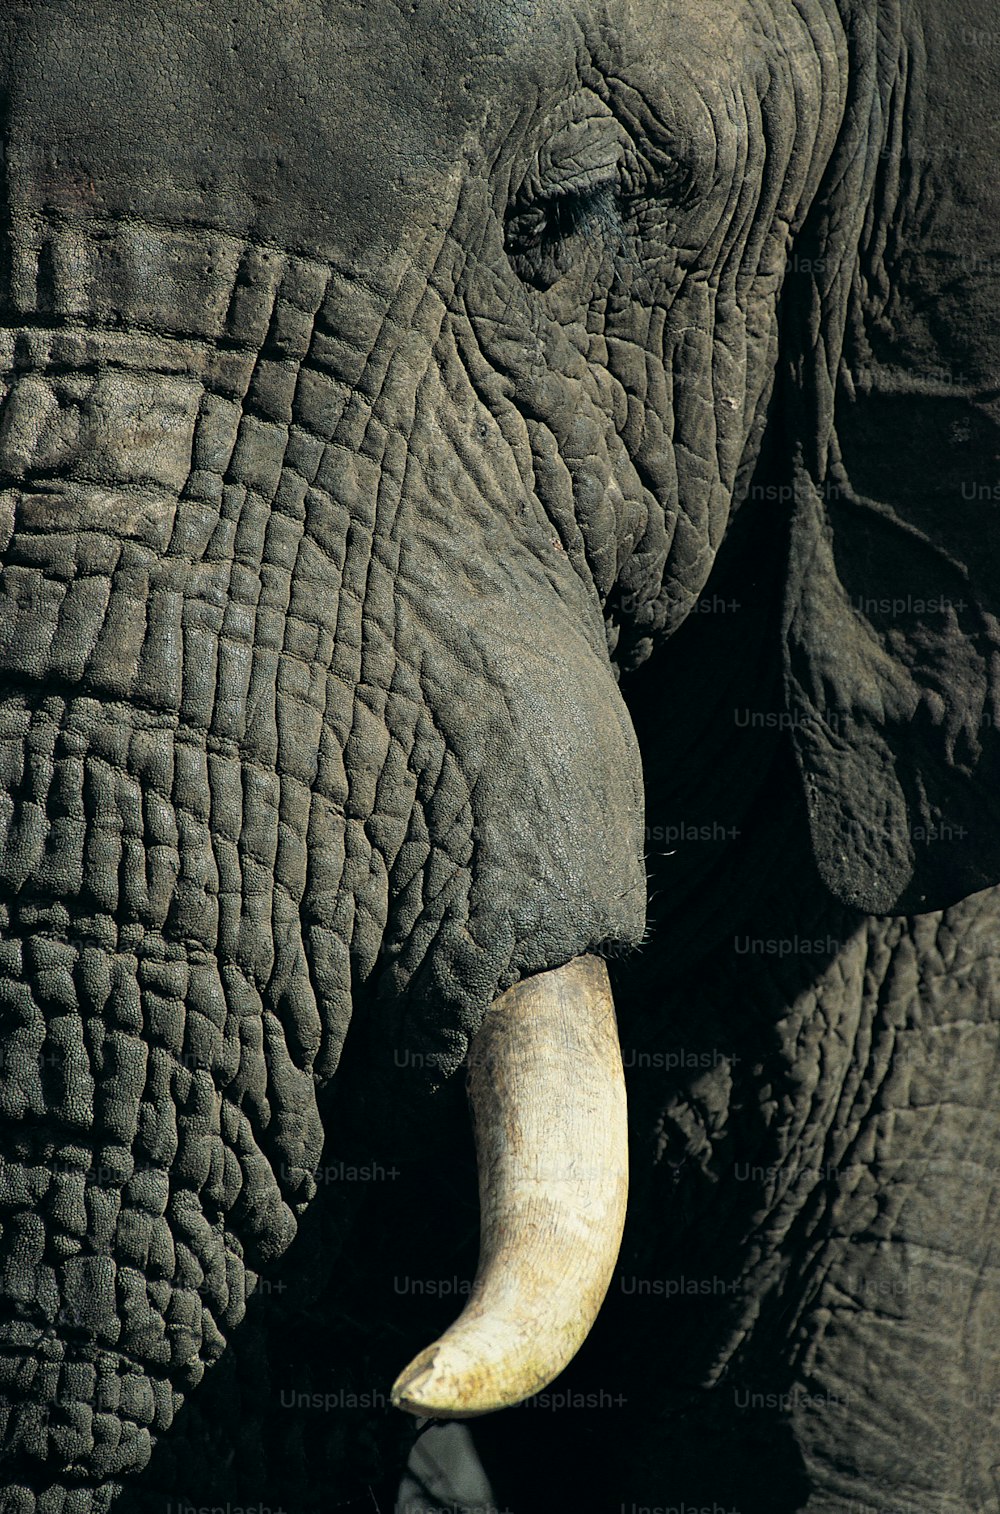 a close up of an elephant's face with a long tusk